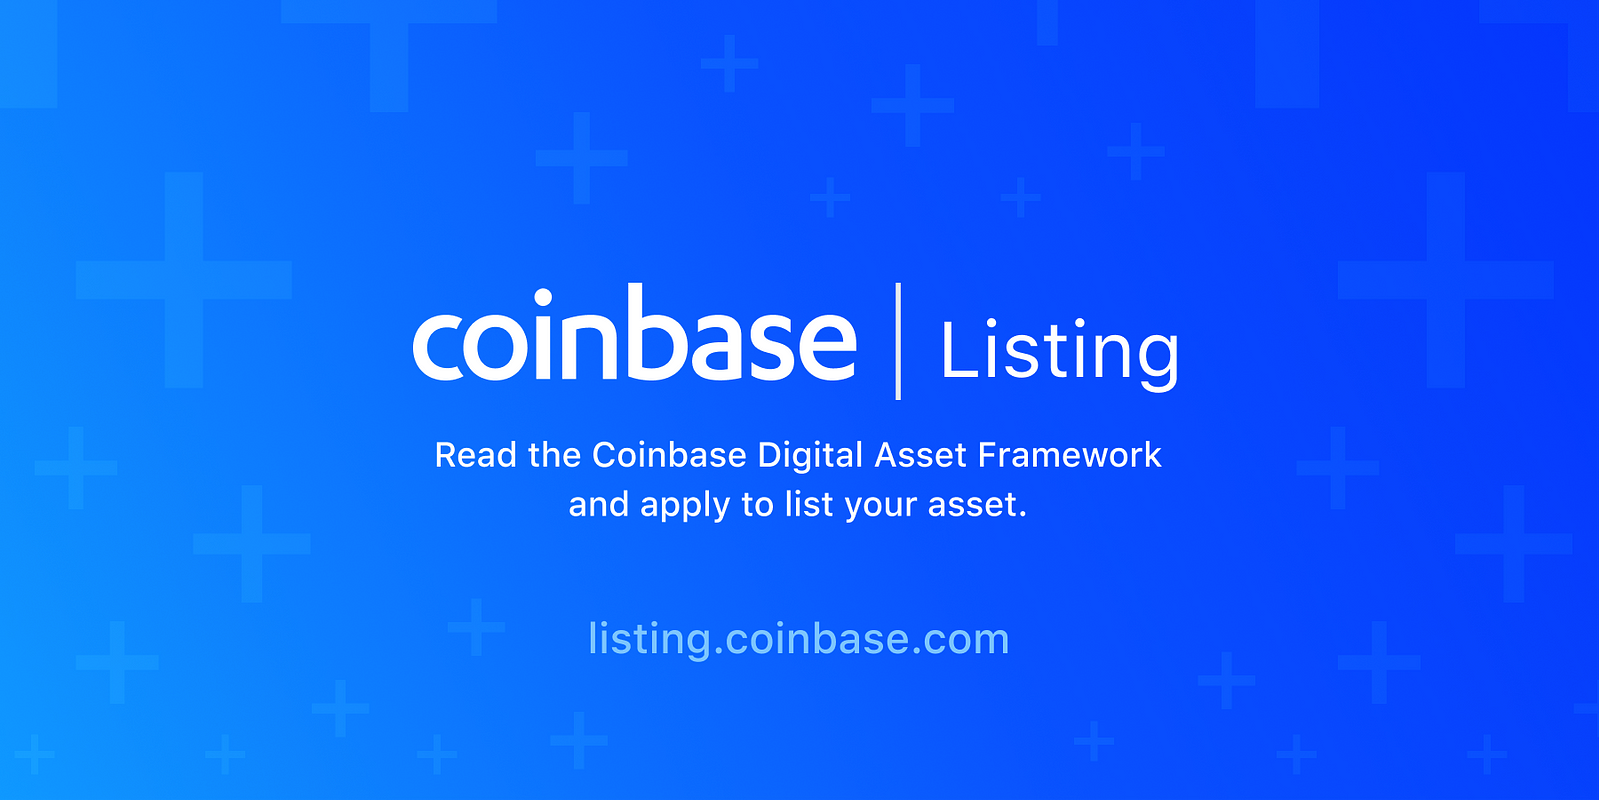 Coinbase’s New Asset Listing Process – The Coinbase Blog